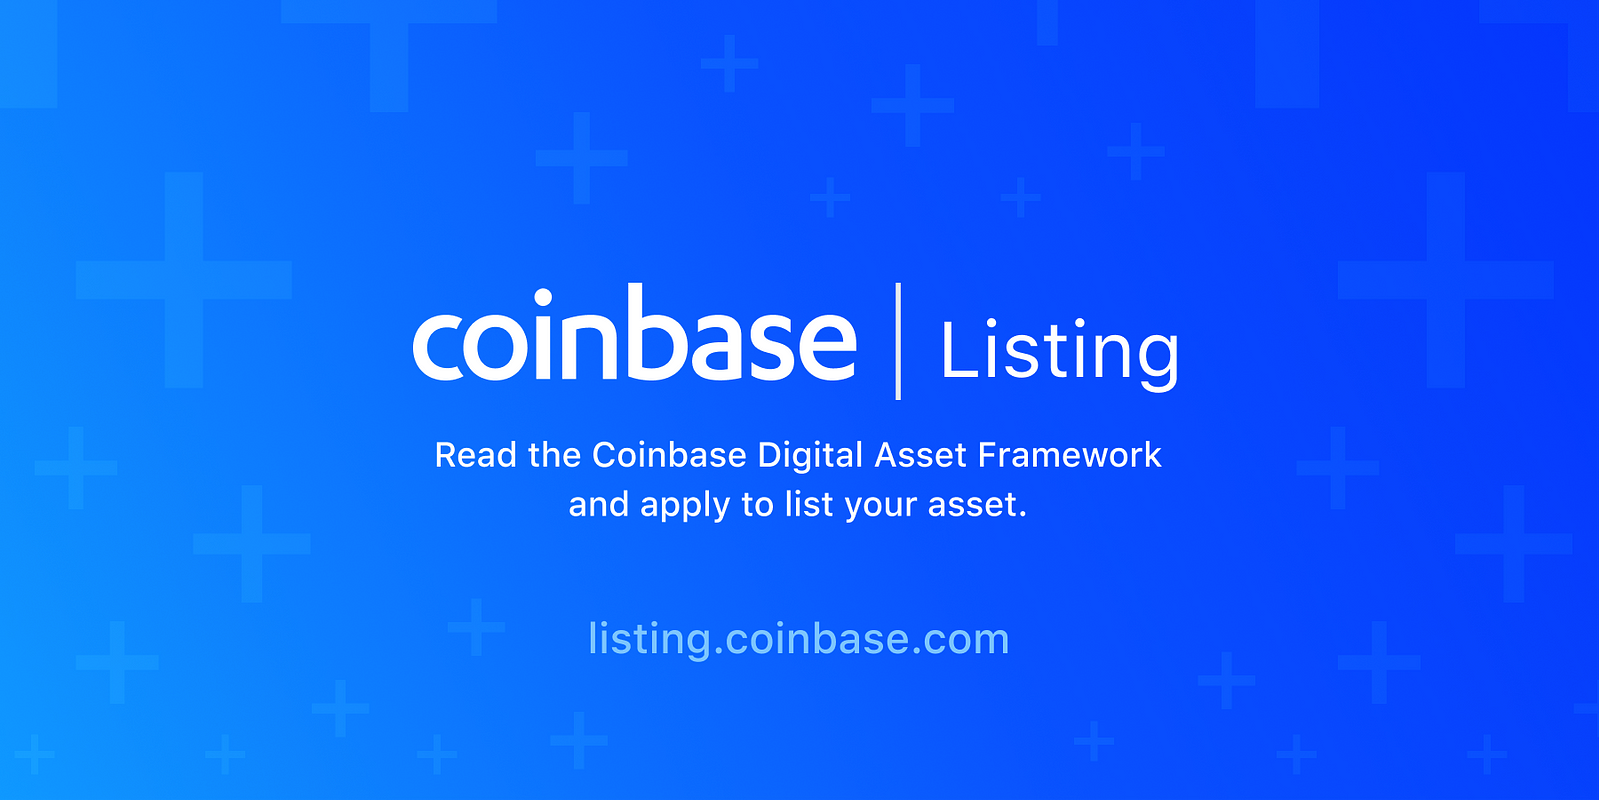 Coinbase’s New Asset Listing Process – The Coinbase Blog